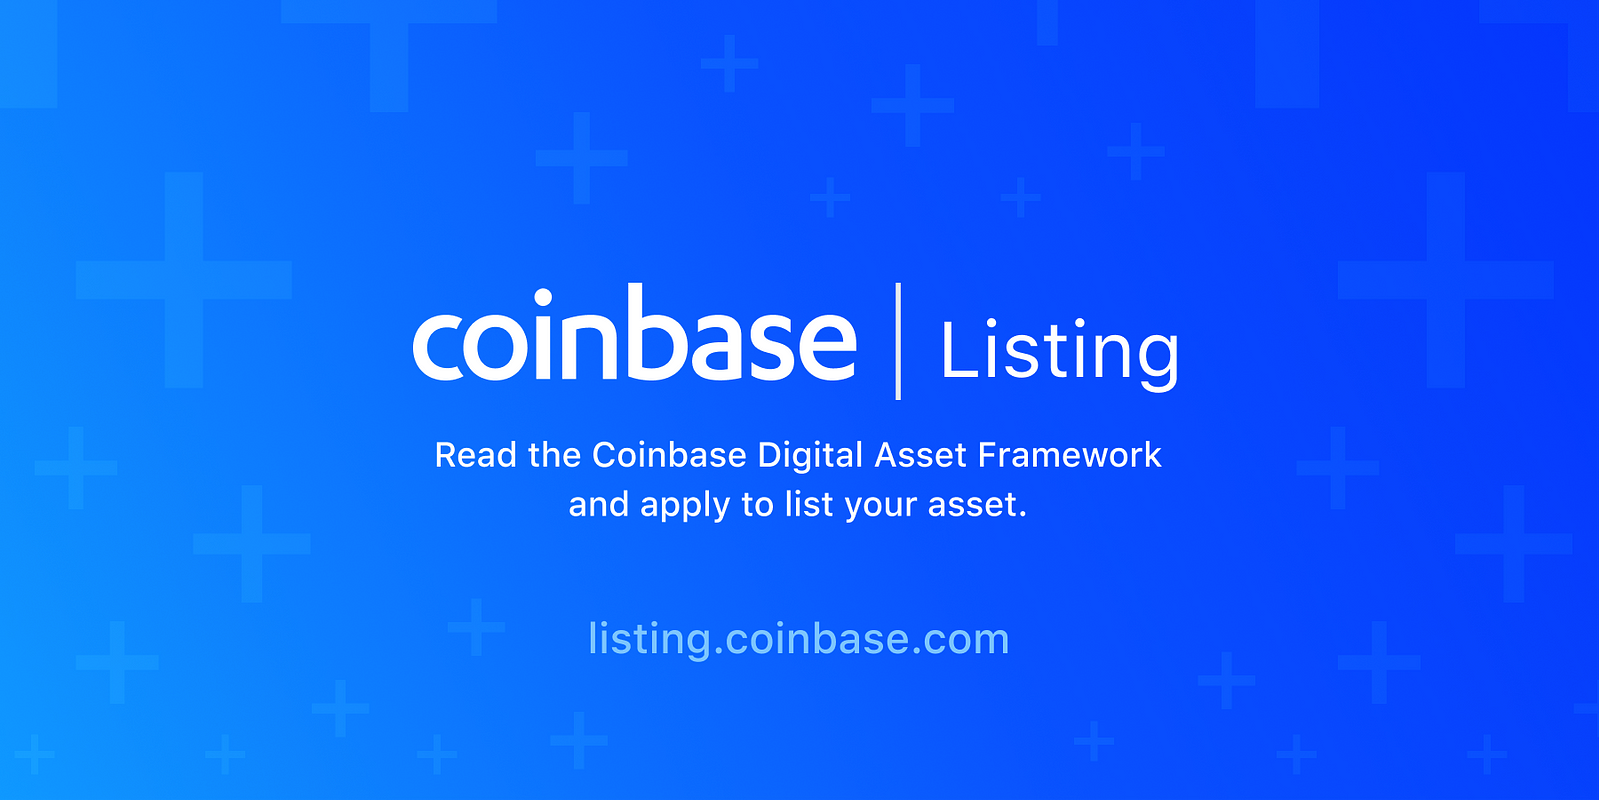 Coinbase’s New Asset Listing Process – The Coinbase Blog